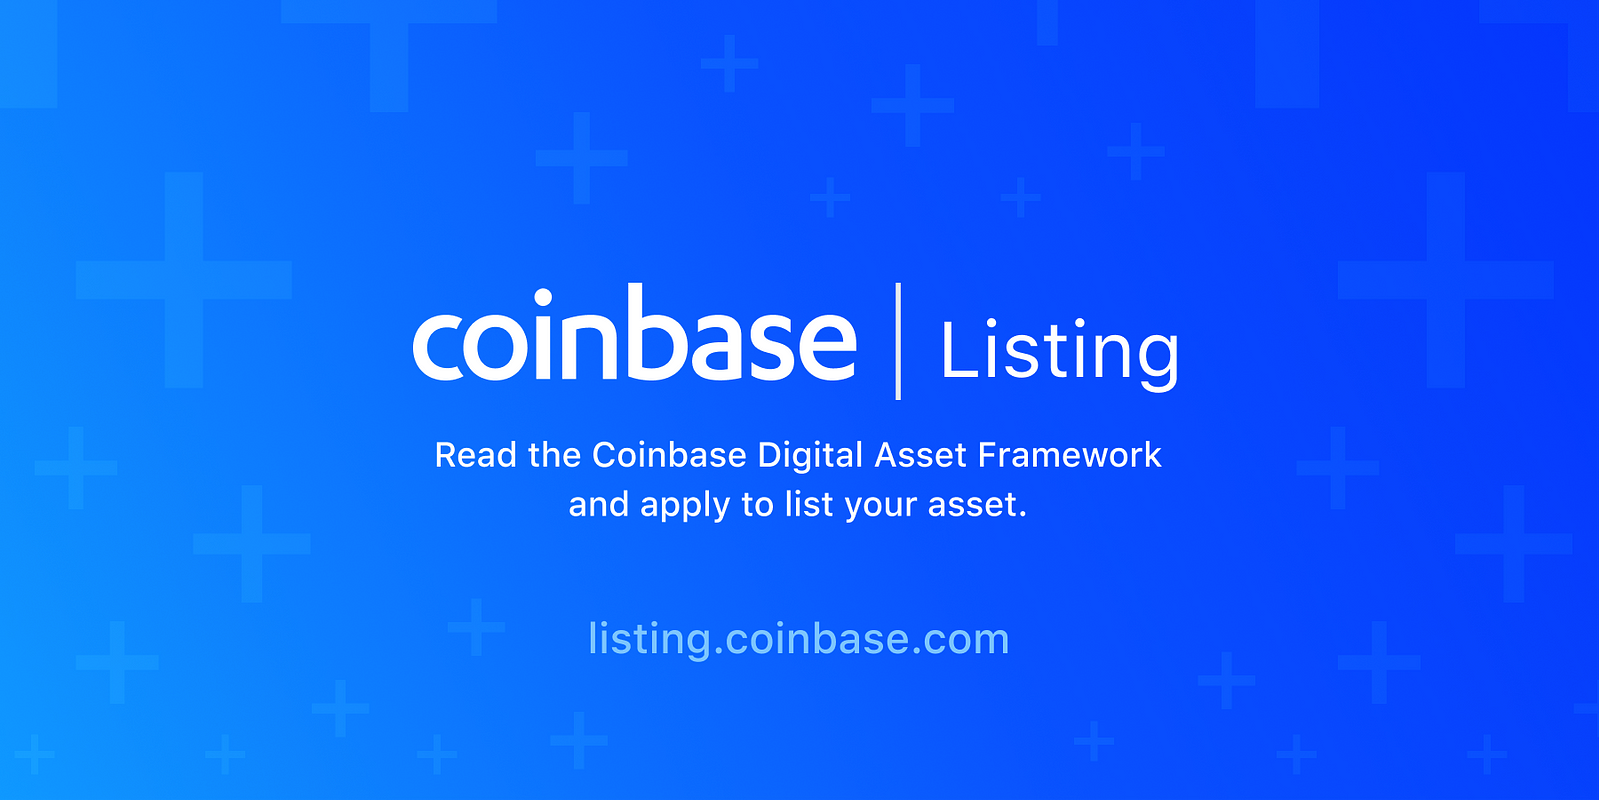 Coinbase’s New Asset Listing Process – The Coinbase Blog